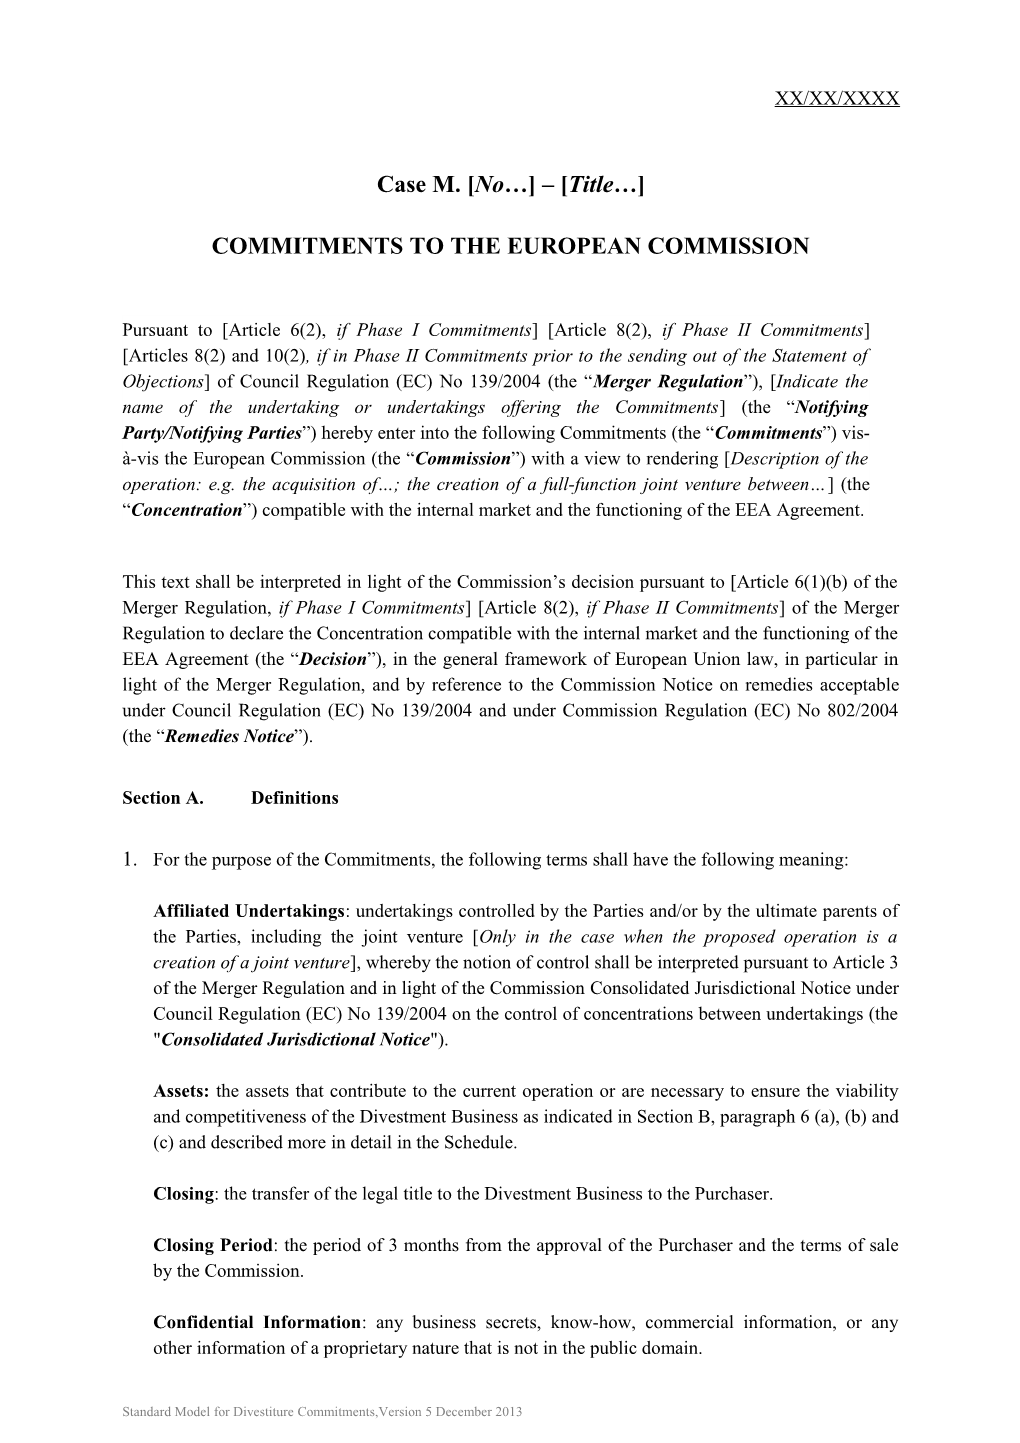 Template for Commitments to the European Commission